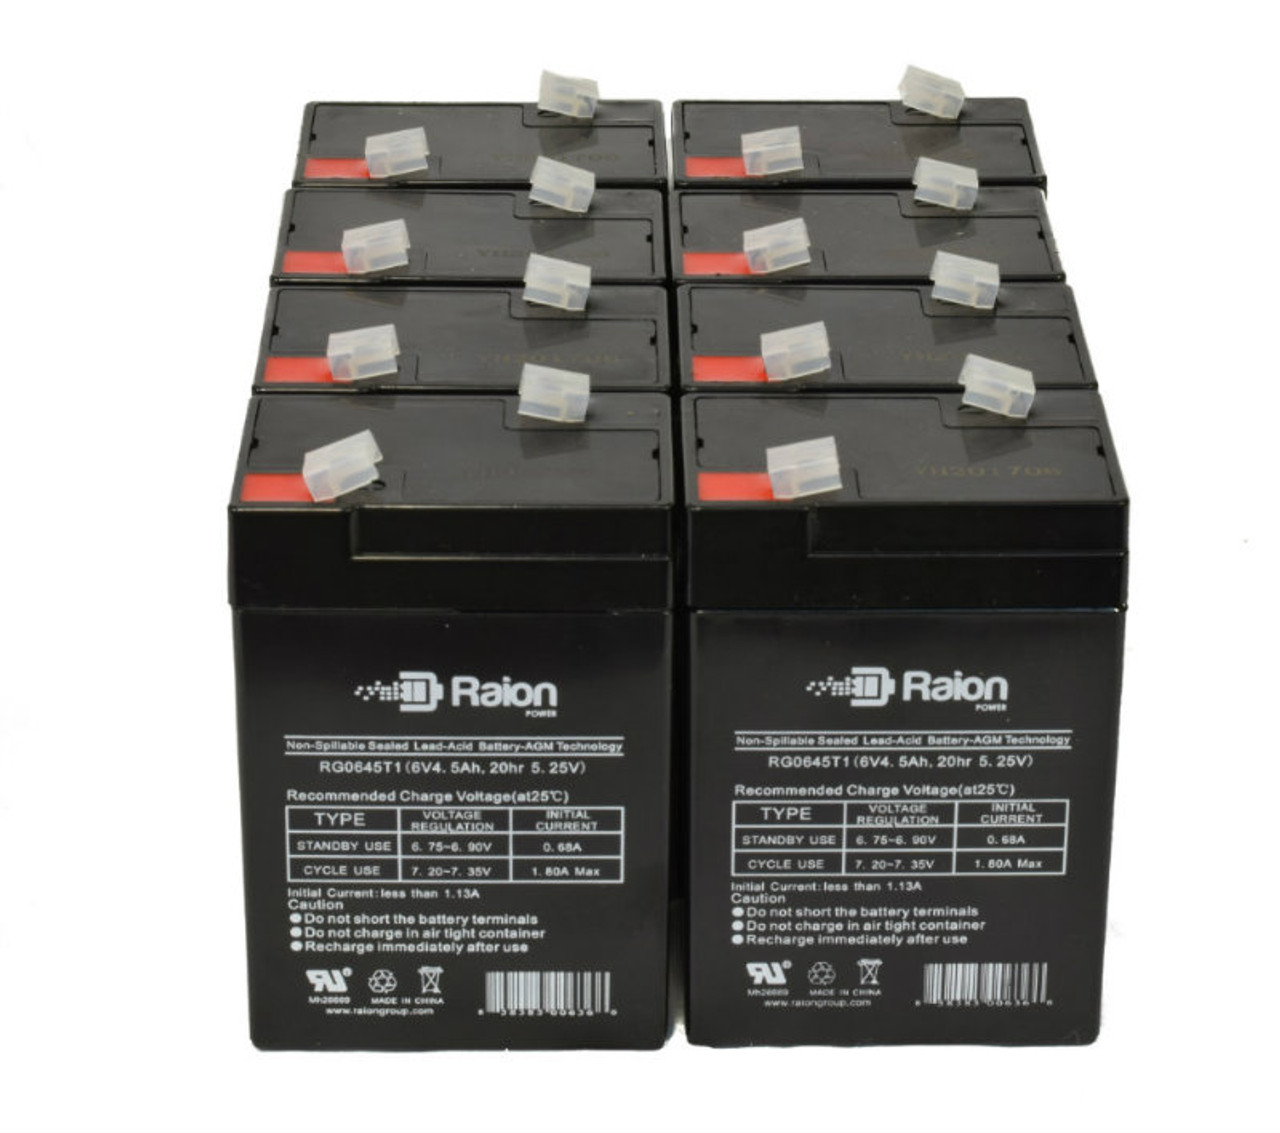 Raion Power RG0645T1 6V 4.5Ah Replacement Medical Equipment Battery for Criticare Systems 50245 Pulse Oximeter - 8 Pack